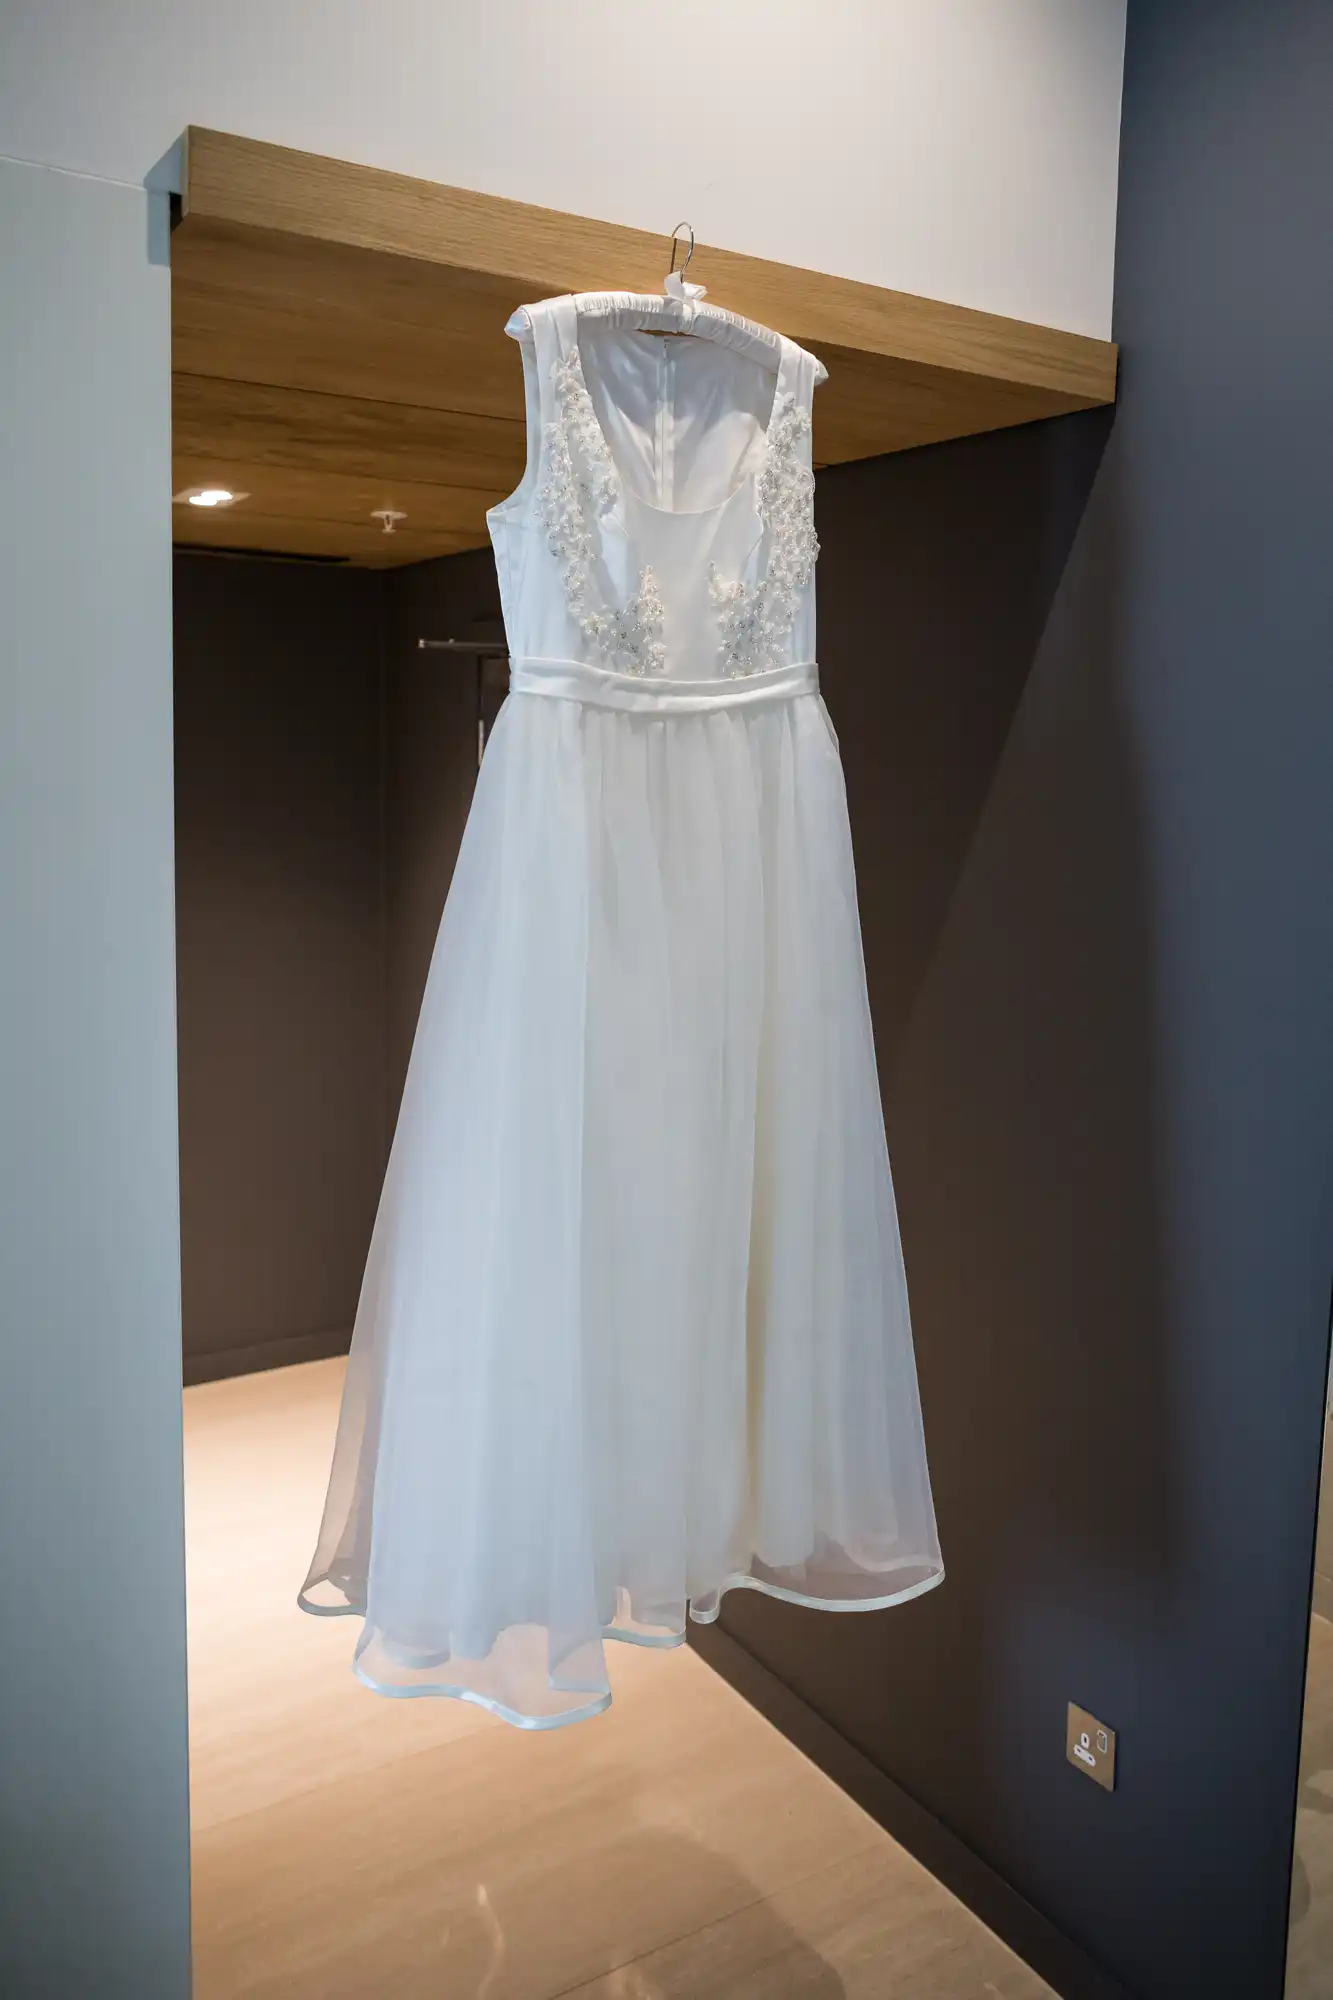 A white wedding dress with lace details hanging on a hanger against a dark blue wall with wood paneling above.